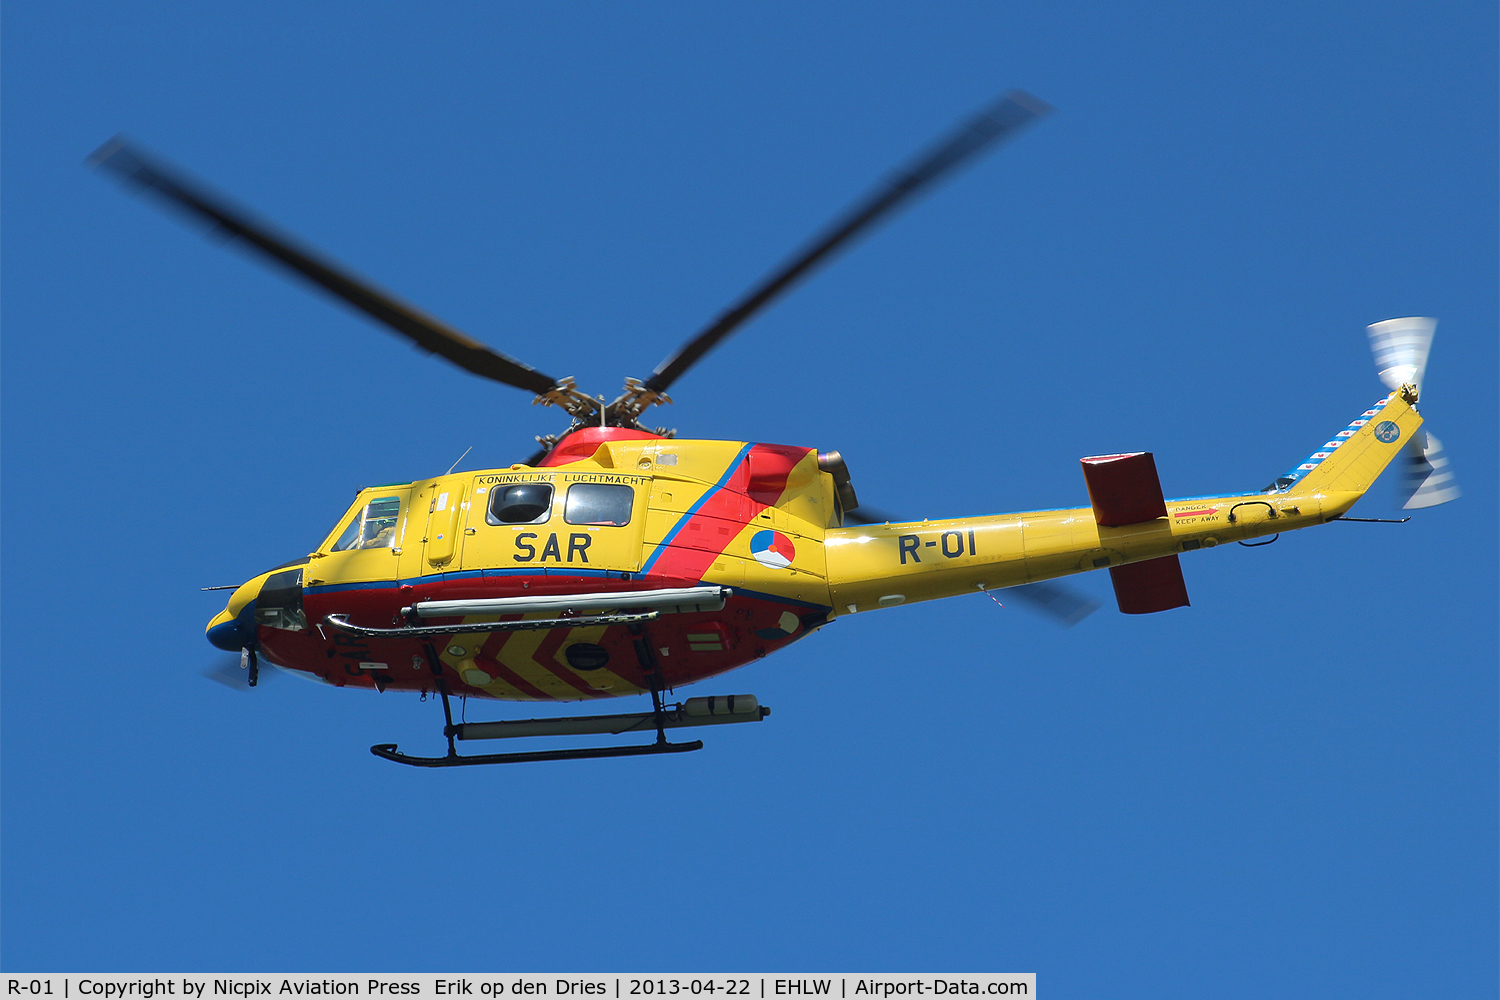 R-01, Agusta AB-412SP C/N 25630, AB-412 R-01 is used for Rescue duties and is based at Leeuwarden AB